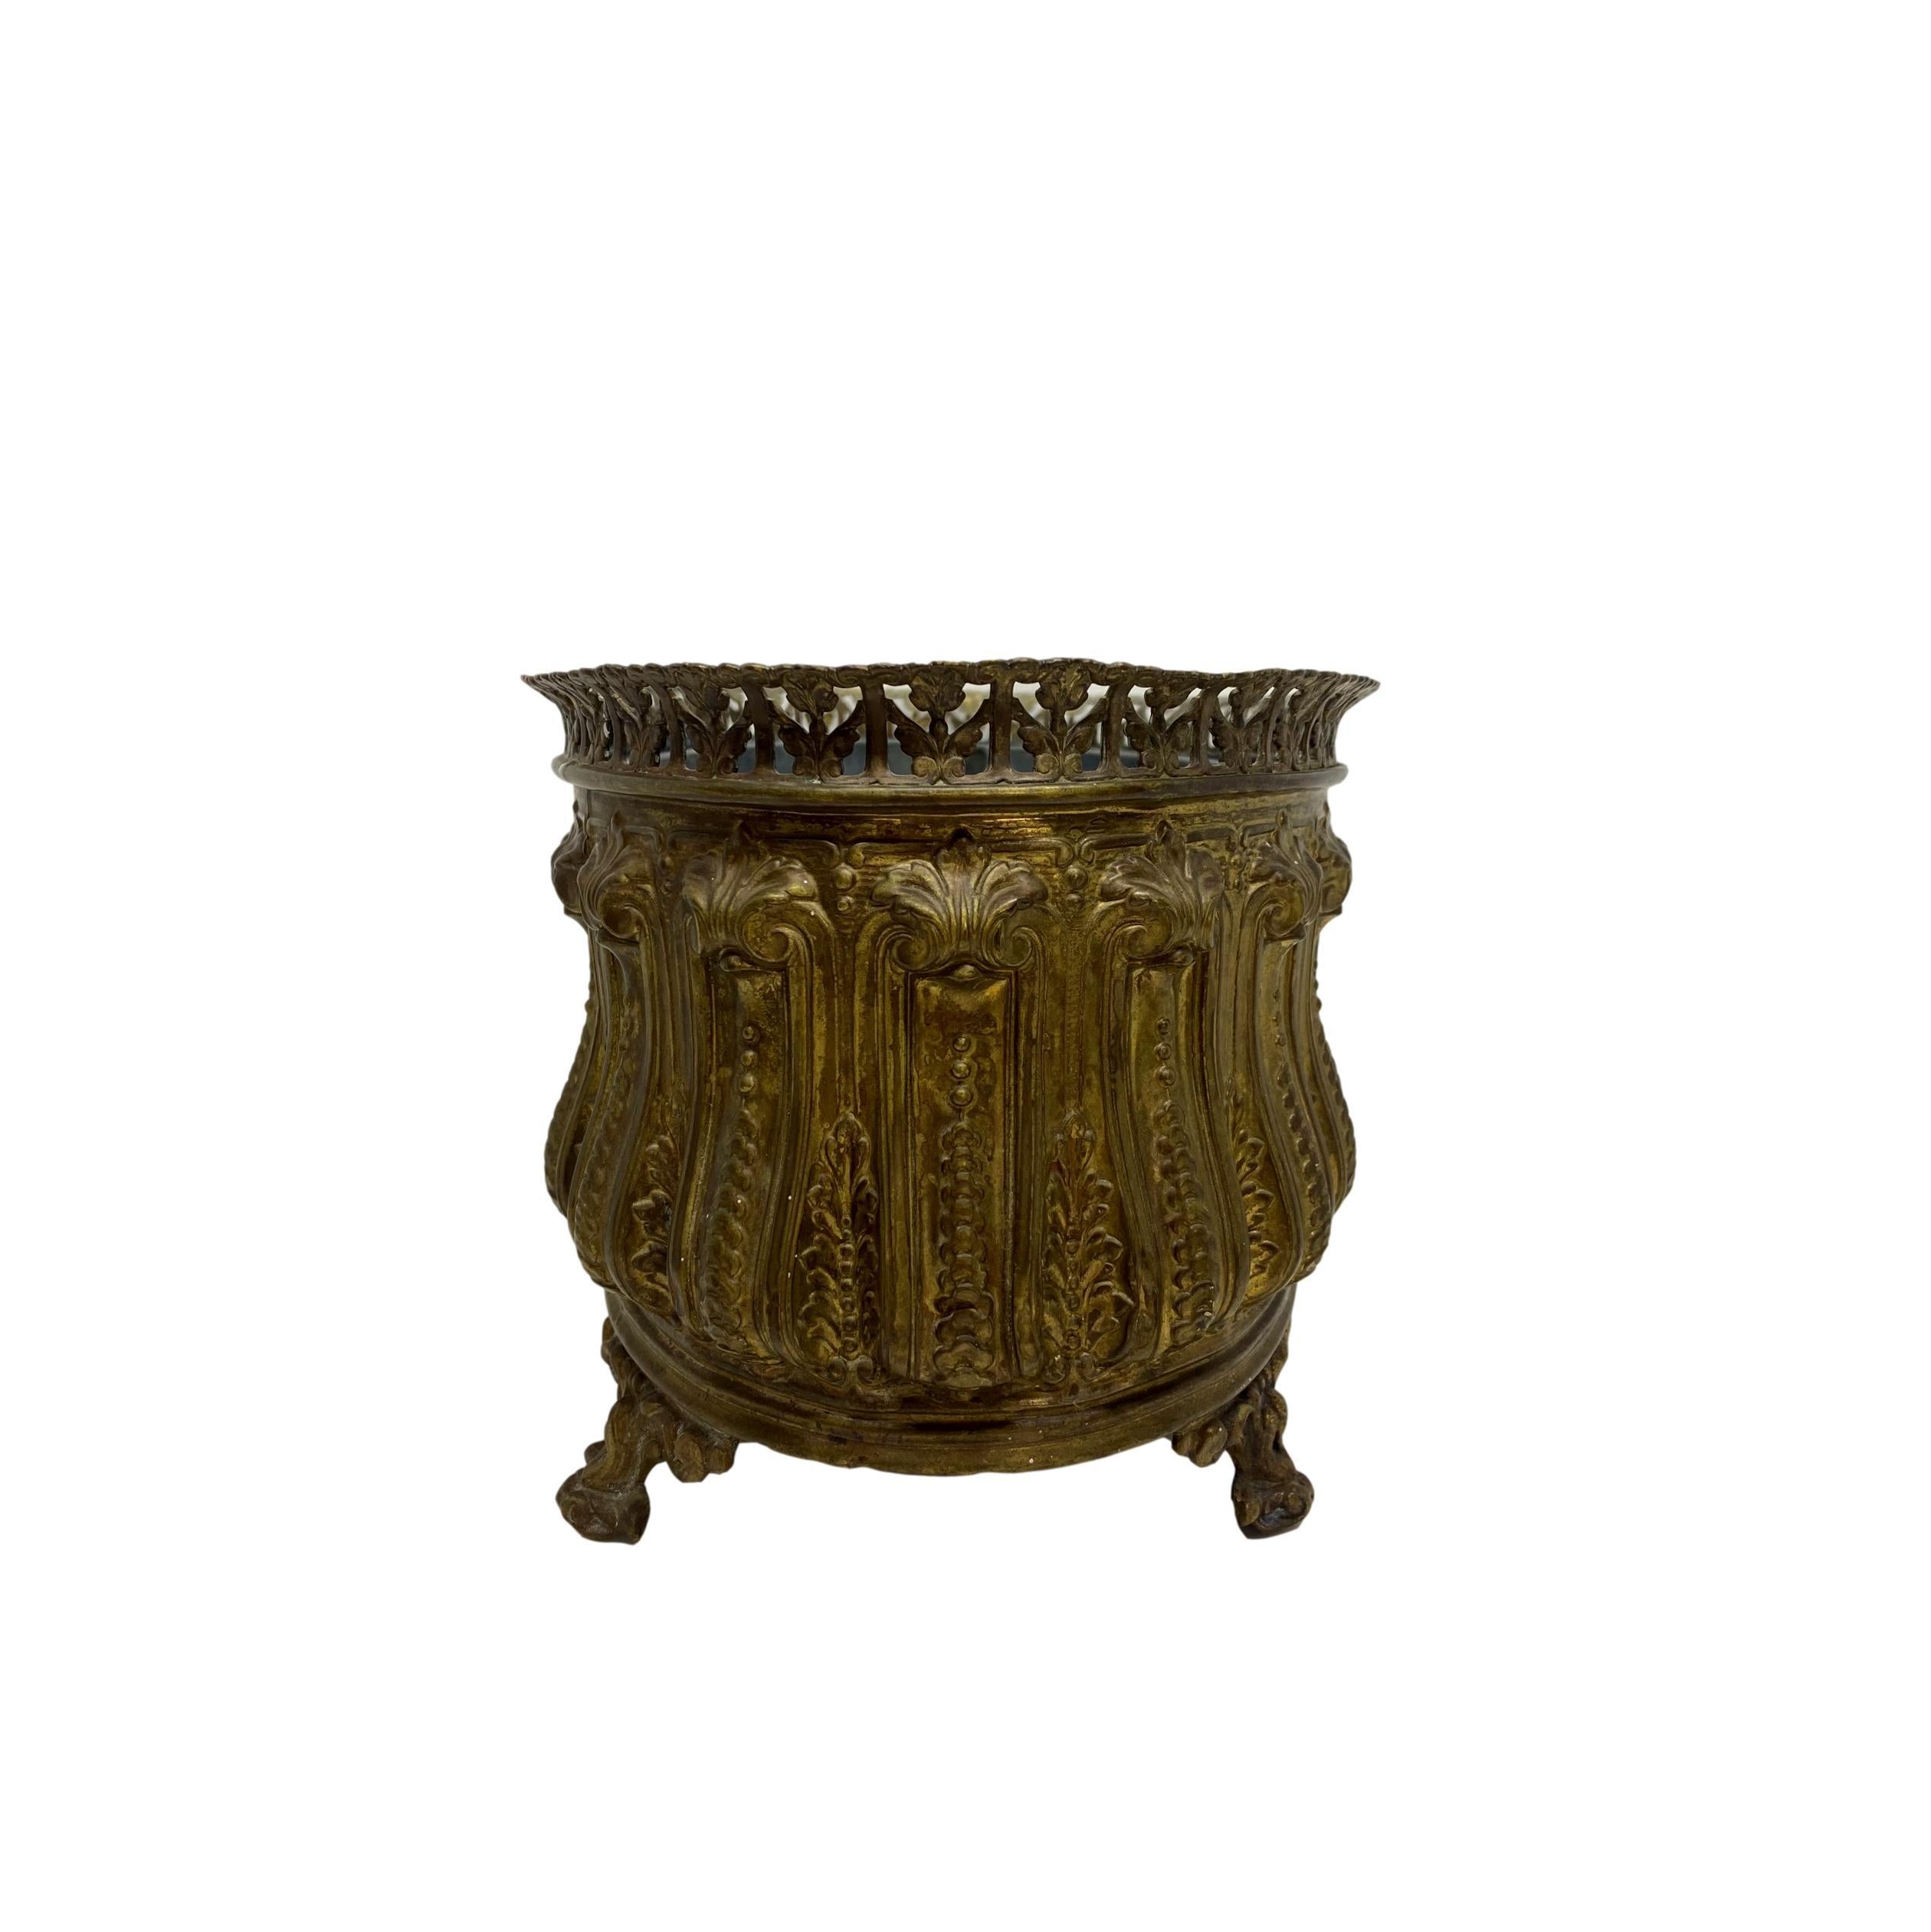 Hand-hammered brass repousse cachepot/jardiniere with original zinc lining, French, Second Empire, ca. 1860, the oval body formed by highly stylized channels and resesses, with a fillagreed rim, on ornate solid brass feet.